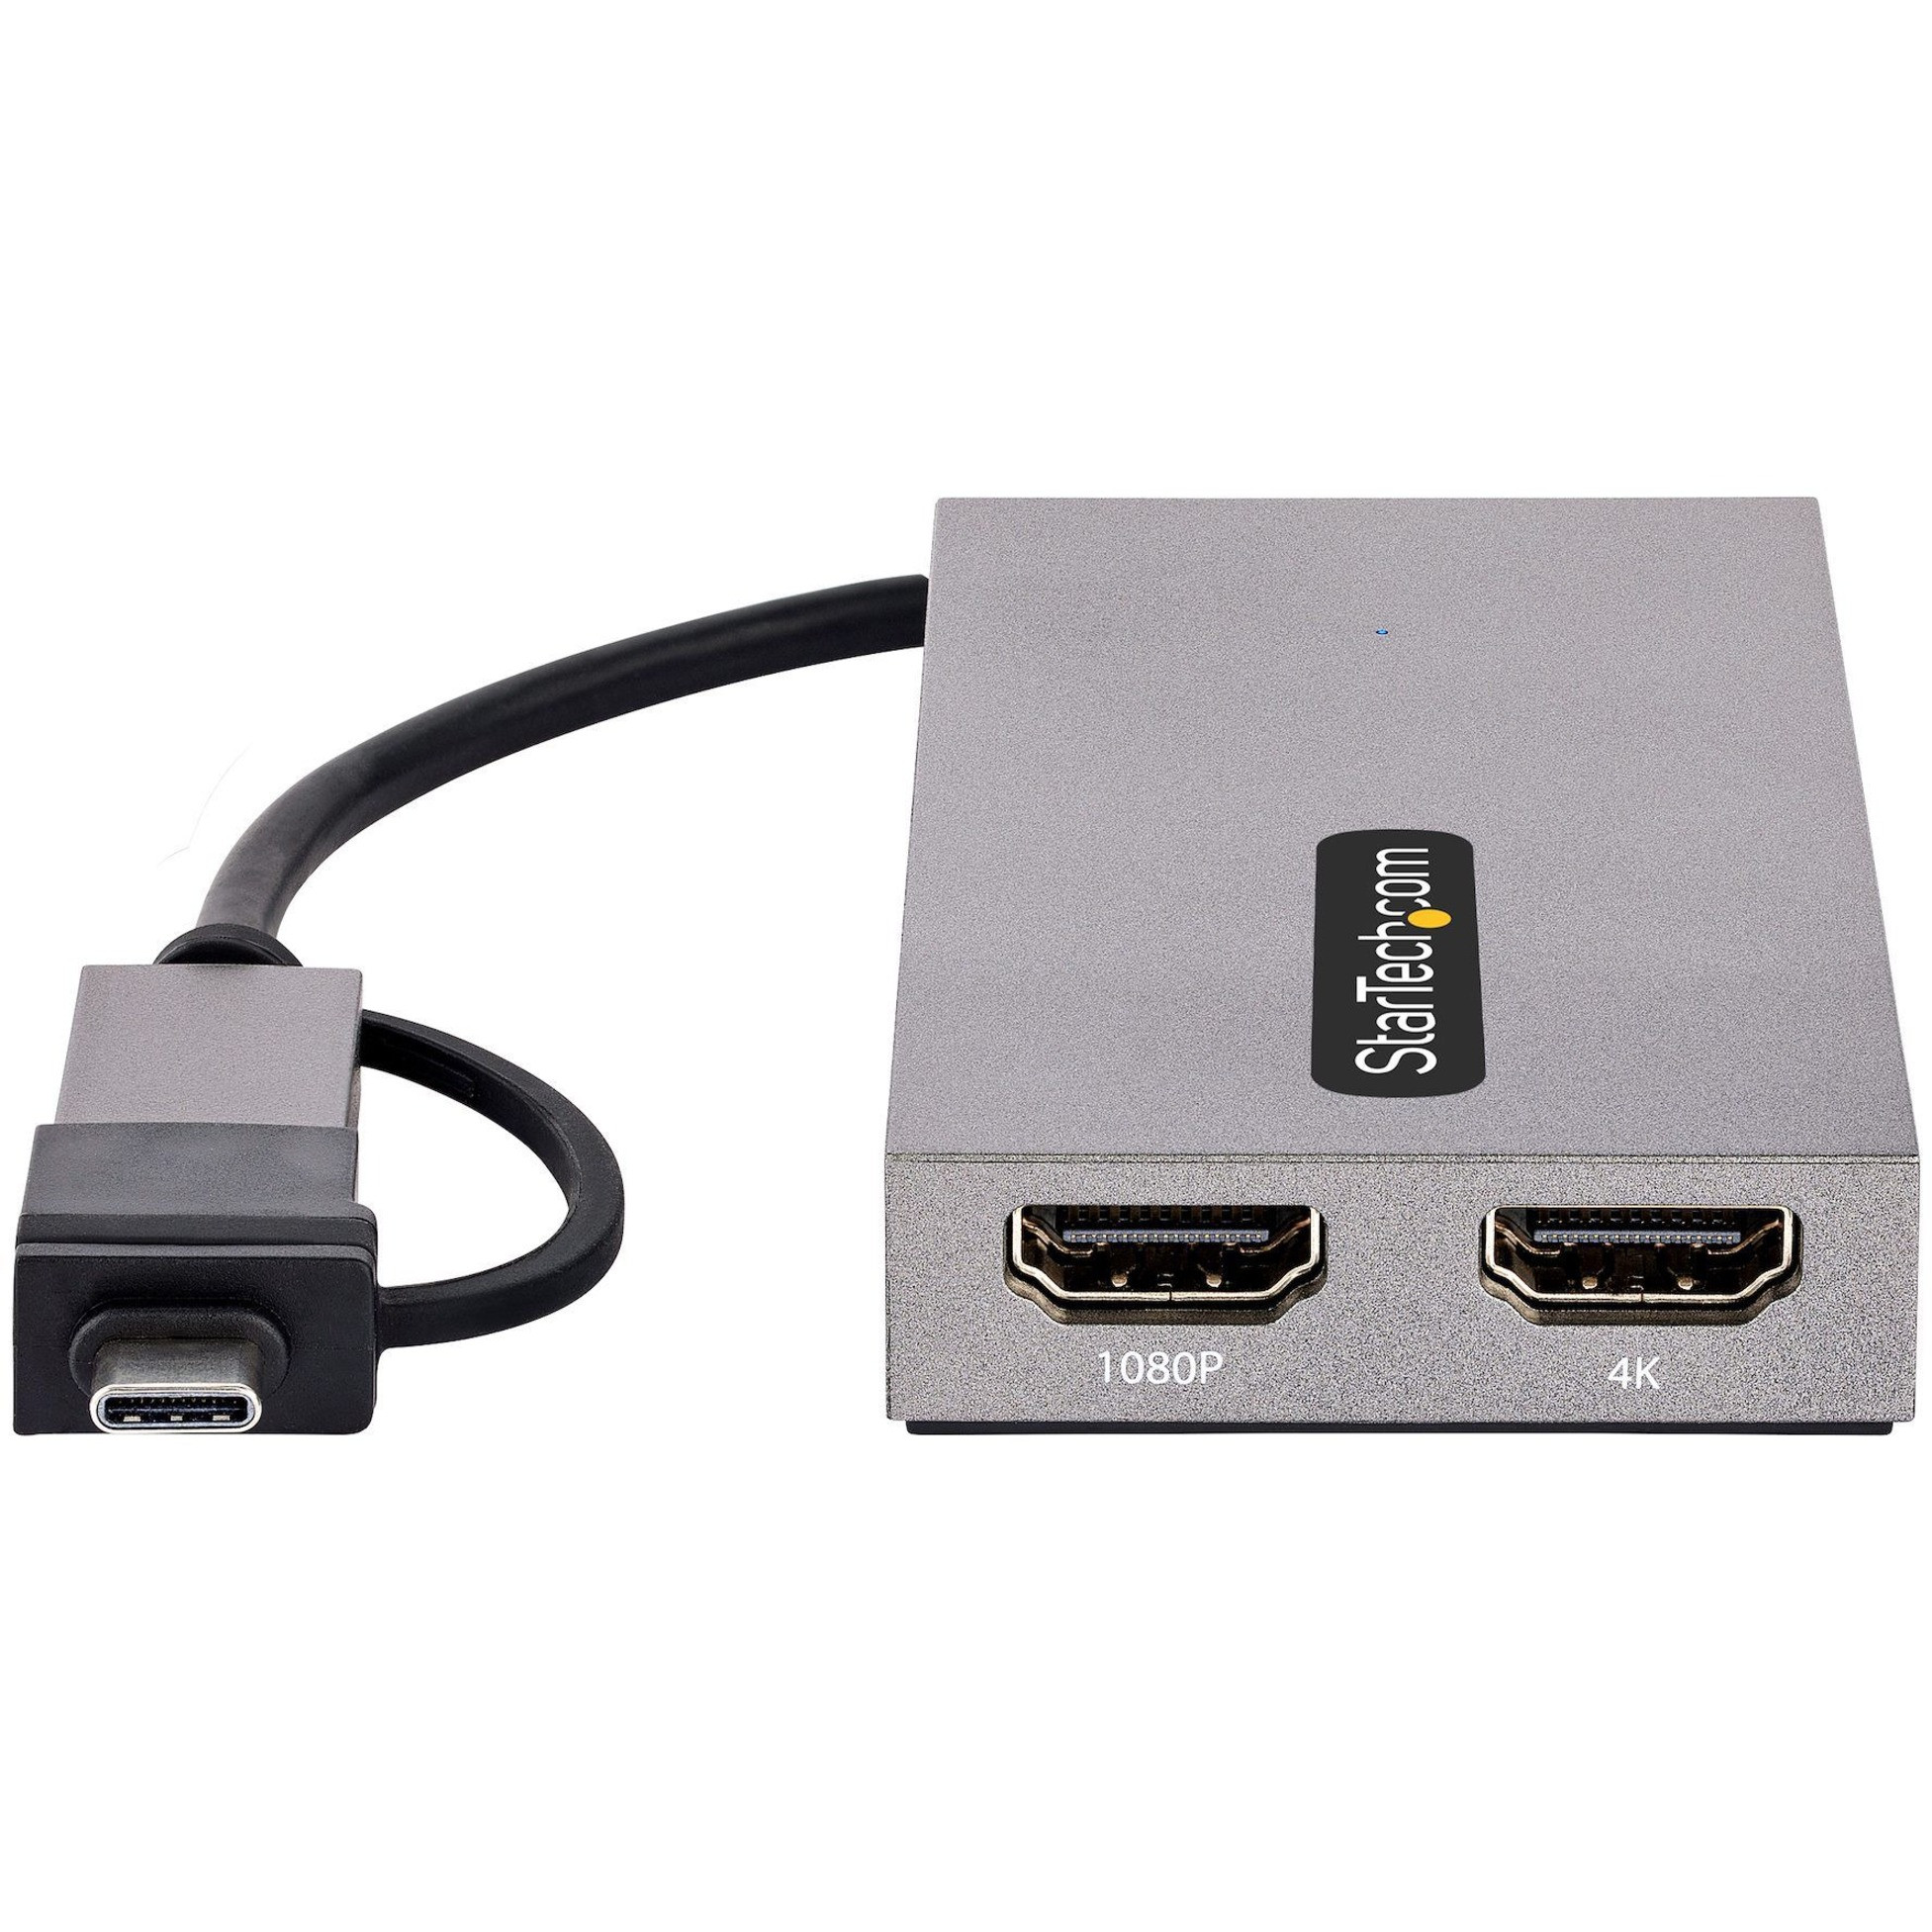 StarTech.com USB 3.0 to HDMI and VGA Adapter, 4K/1080p USB Type-A